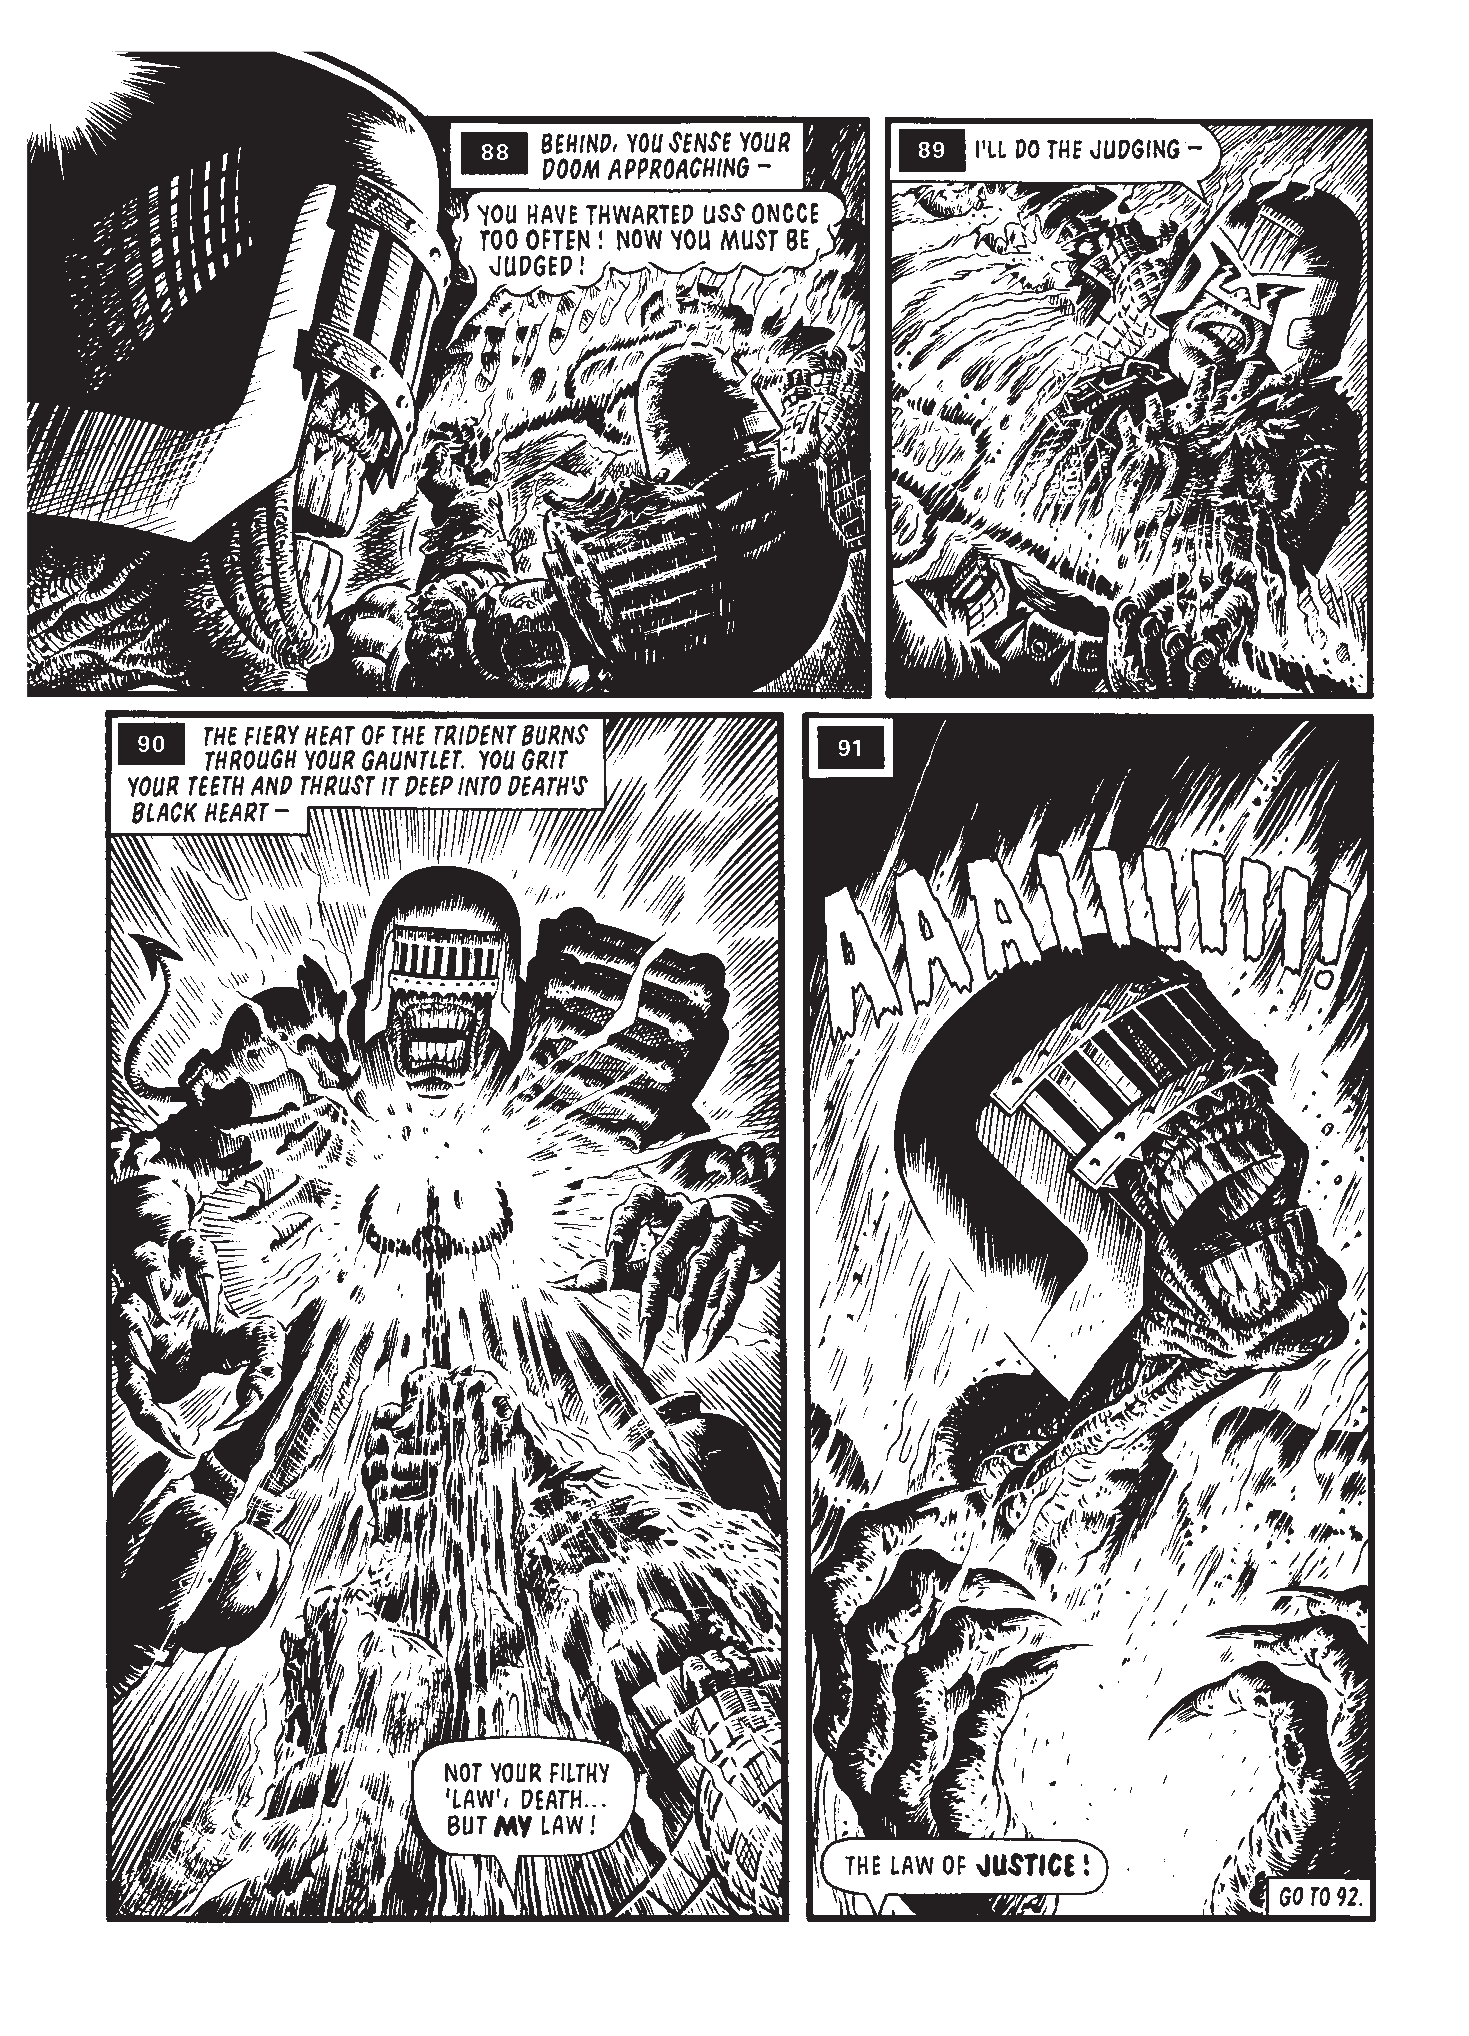 Read online Judge Dredd: The Restricted Files comic -  Issue # TPB 4 - 236